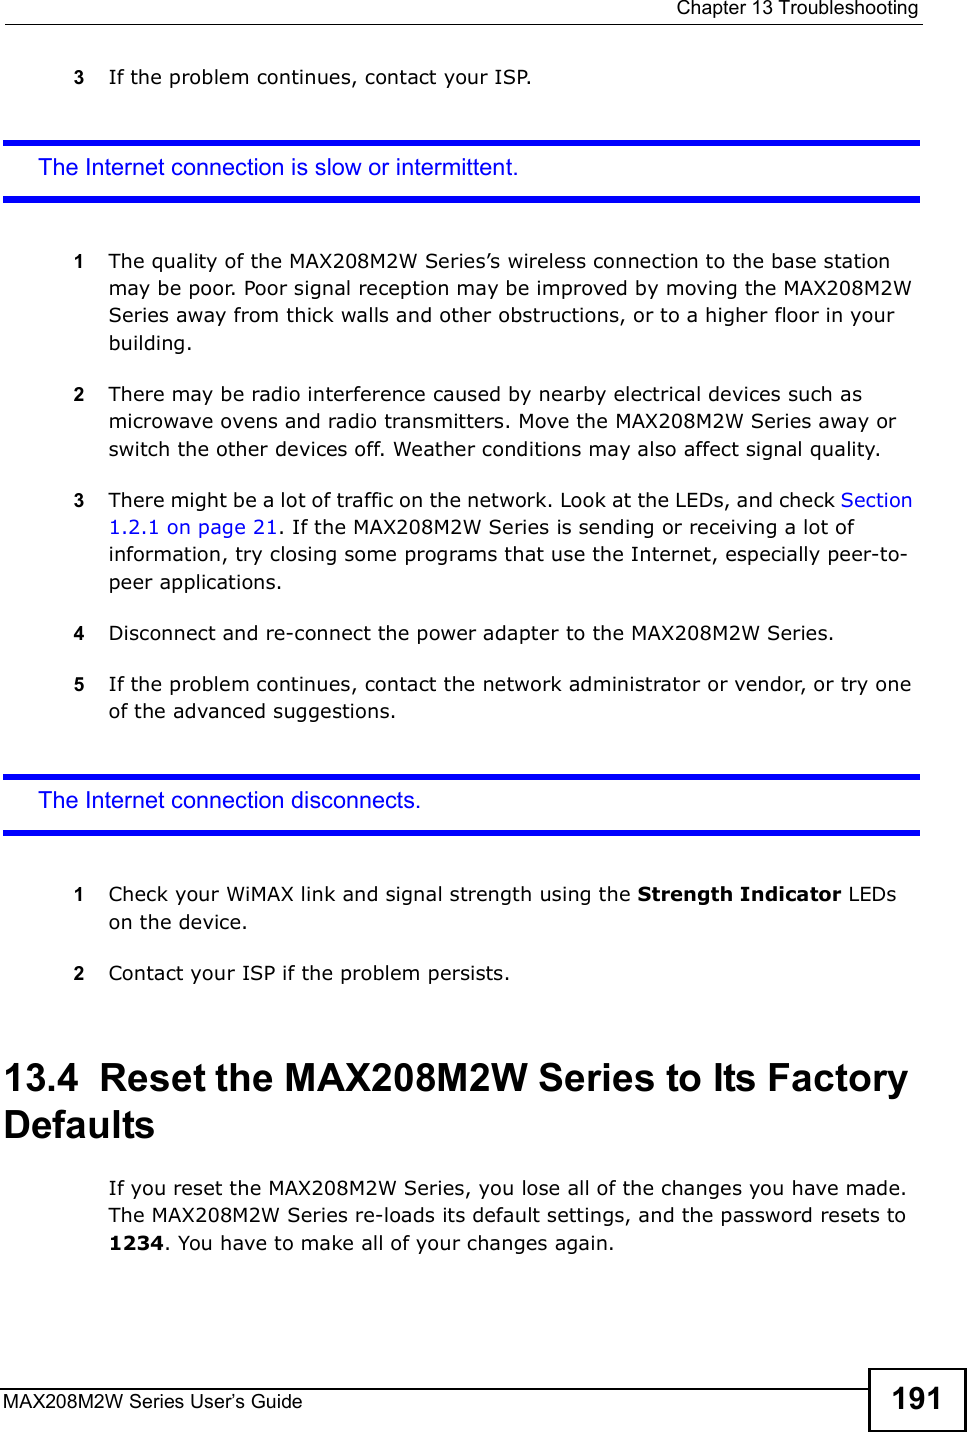  Chapter 13TroubleshootingMAX208M2W Series User s Guide 1913If the problem continues, contact your ISP.The Internet connection is slow or intermittent.1The quality of the MAX208M2W Series s wireless connection to the base station may be poor. Poor signal reception may be improved by moving the MAX208M2W Series away from thick walls and other obstructions, or to a higher floor in your building. 2There may be radio interference caused by nearby electrical devices such as microwave ovens and radio transmitters. Move the MAX208M2W Series away or switch the other devices off. Weather conditions may also affect signal quality.3There might be a lot of traffic on the network. Look at the LEDs, and check Section 1.2.1 on page 21. If the MAX208M2W Series is sending or receiving a lot of information, try closing some programs that use the Internet, especially peer-to-peer applications.4Disconnect and re-connect the power adapter to the MAX208M2W Series.5If the problem continues, contact the network administrator or vendor, or try one of the advanced suggestions.The Internet connection disconnects.1Check your WiMAX link and signal strength using the Strength Indicator LEDs on the device.2Contact your ISP if the problem persists. 13.4  Reset the MAX208M2W Series to Its Factory DefaultsIf you reset the MAX208M2W Series, you lose all of the changes you have made. The MAX208M2W Series re-loads its default settings, and the password resets to 1234. You have to make all of your changes again.